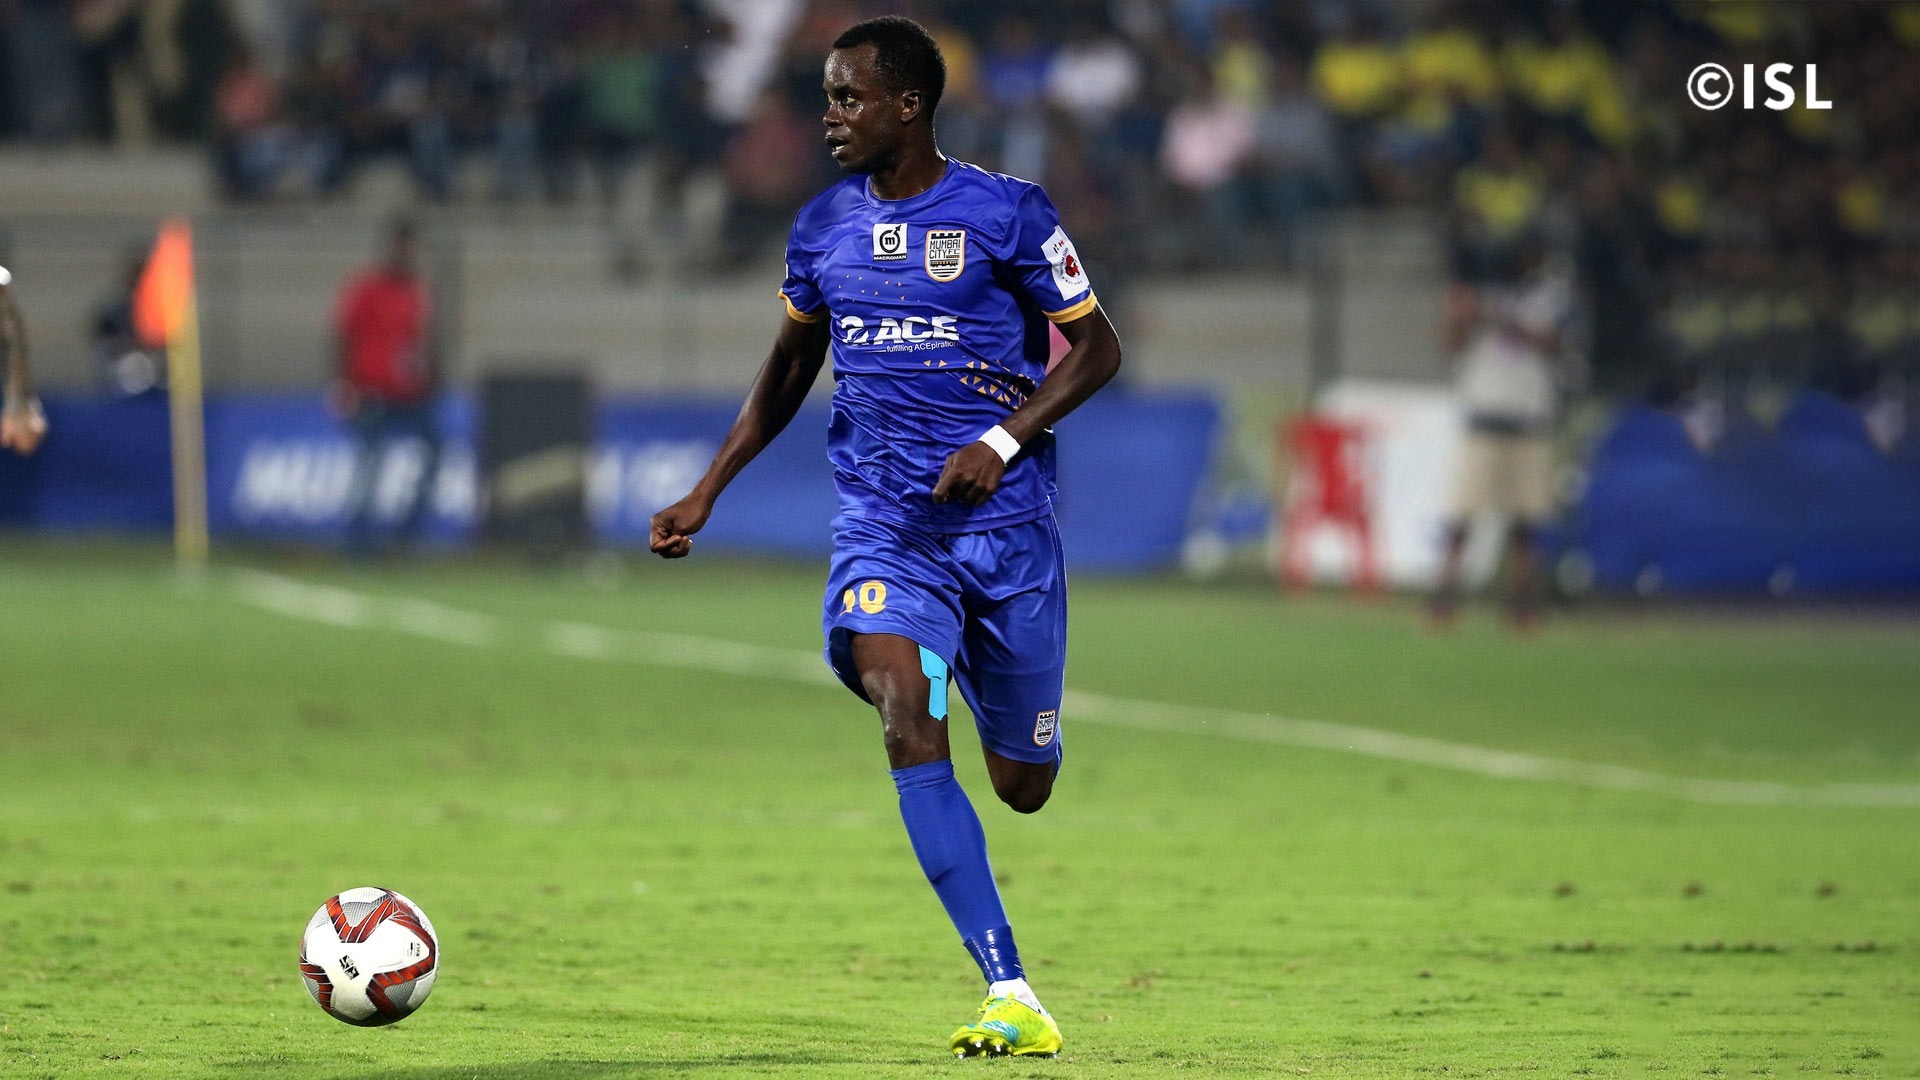 ISL 2019-20 | We’ll see real face of Mumbai if injured players recover in time, says Modou Sougou